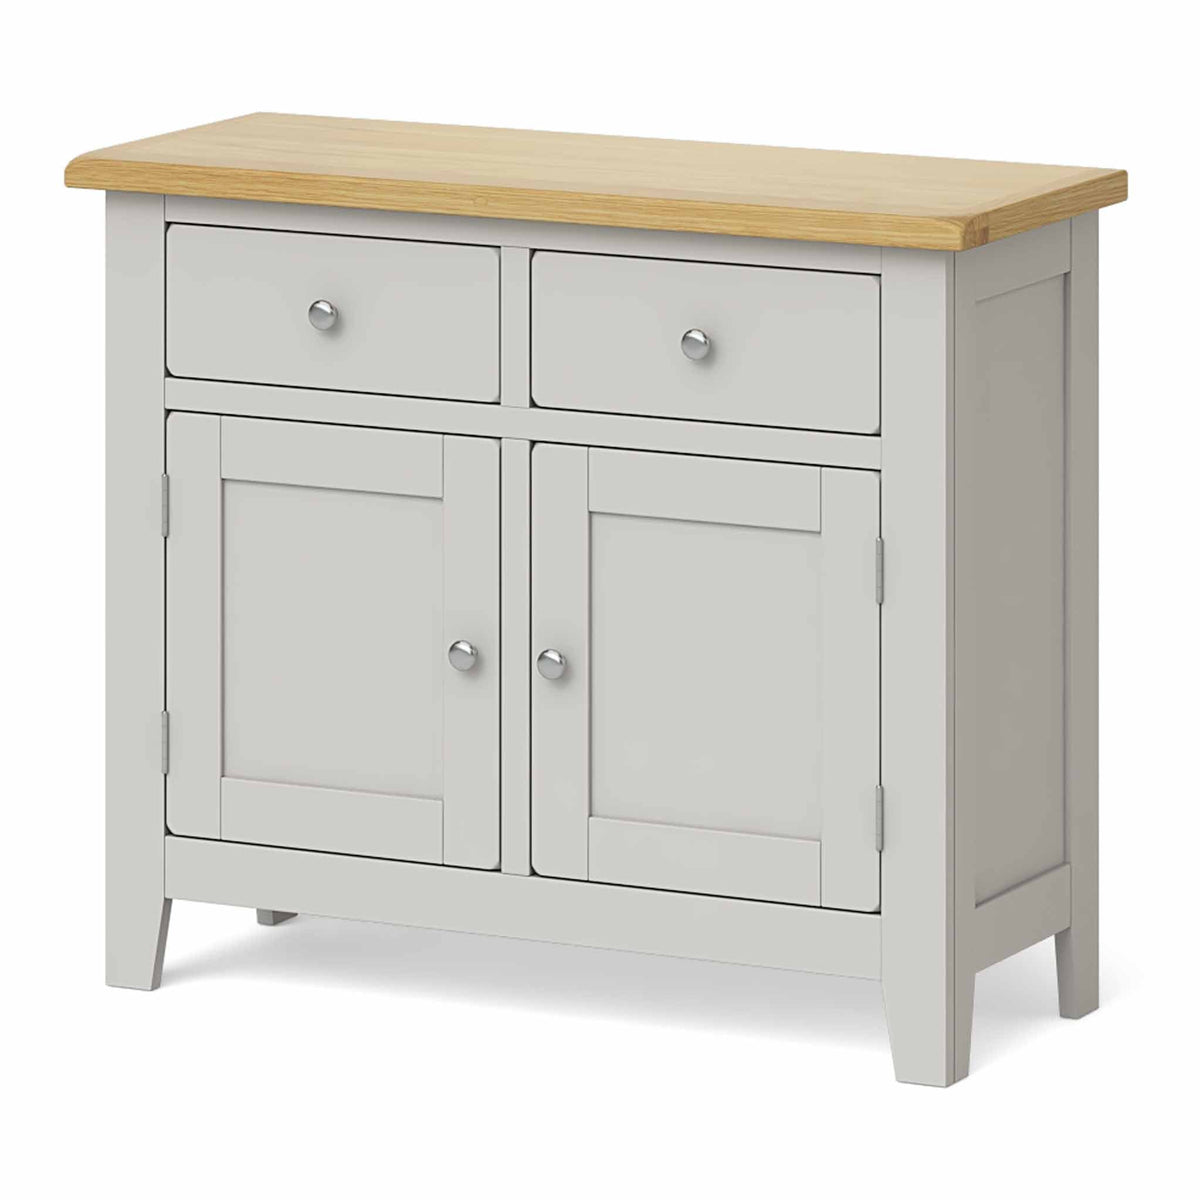 Lundy Grey Small 2 Door Sideboard - Side view